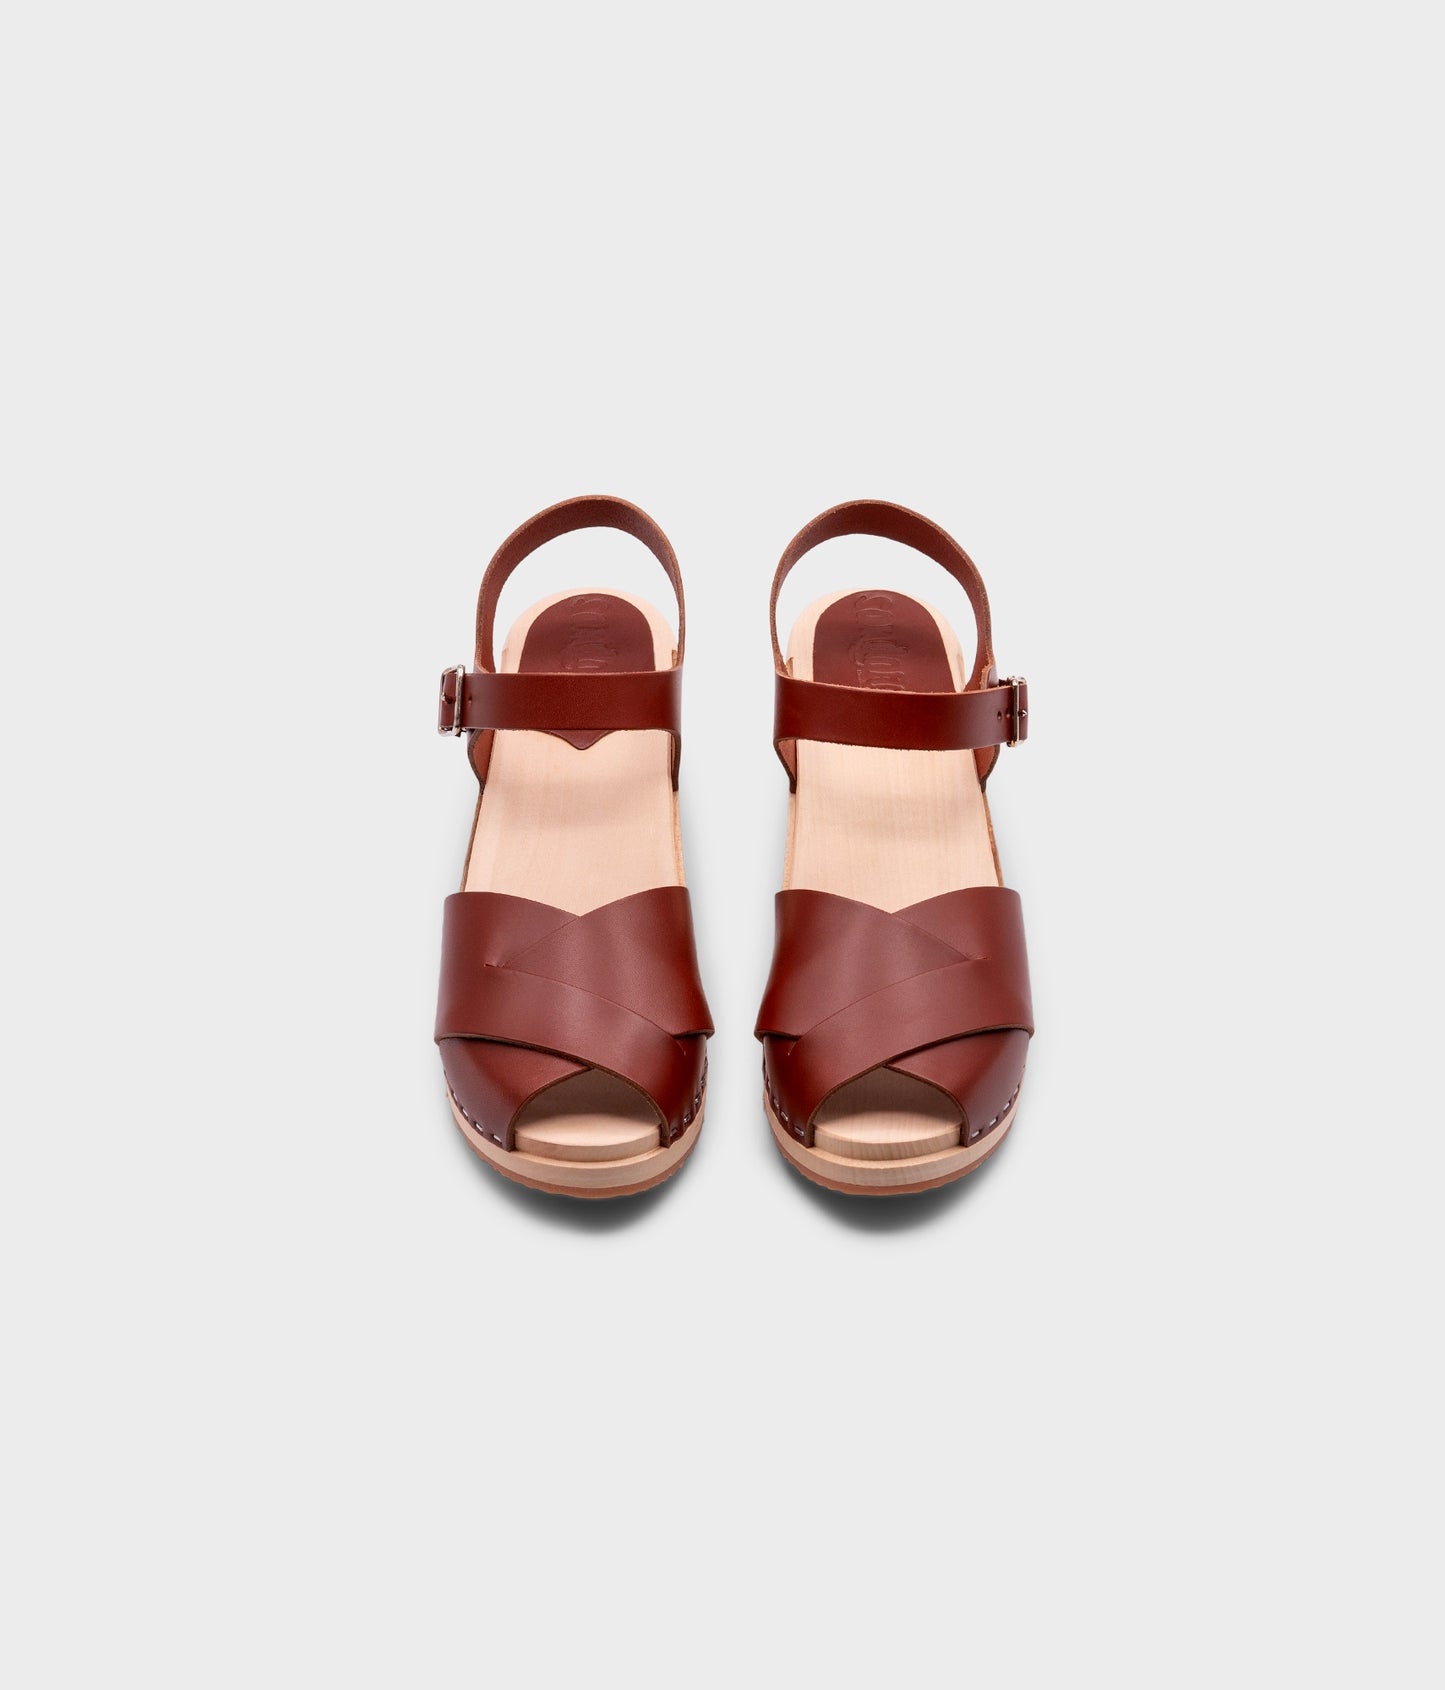 high heeled clog sandals in cognac red vegetable tanned leather with an open-toe stapled on a light wooden base